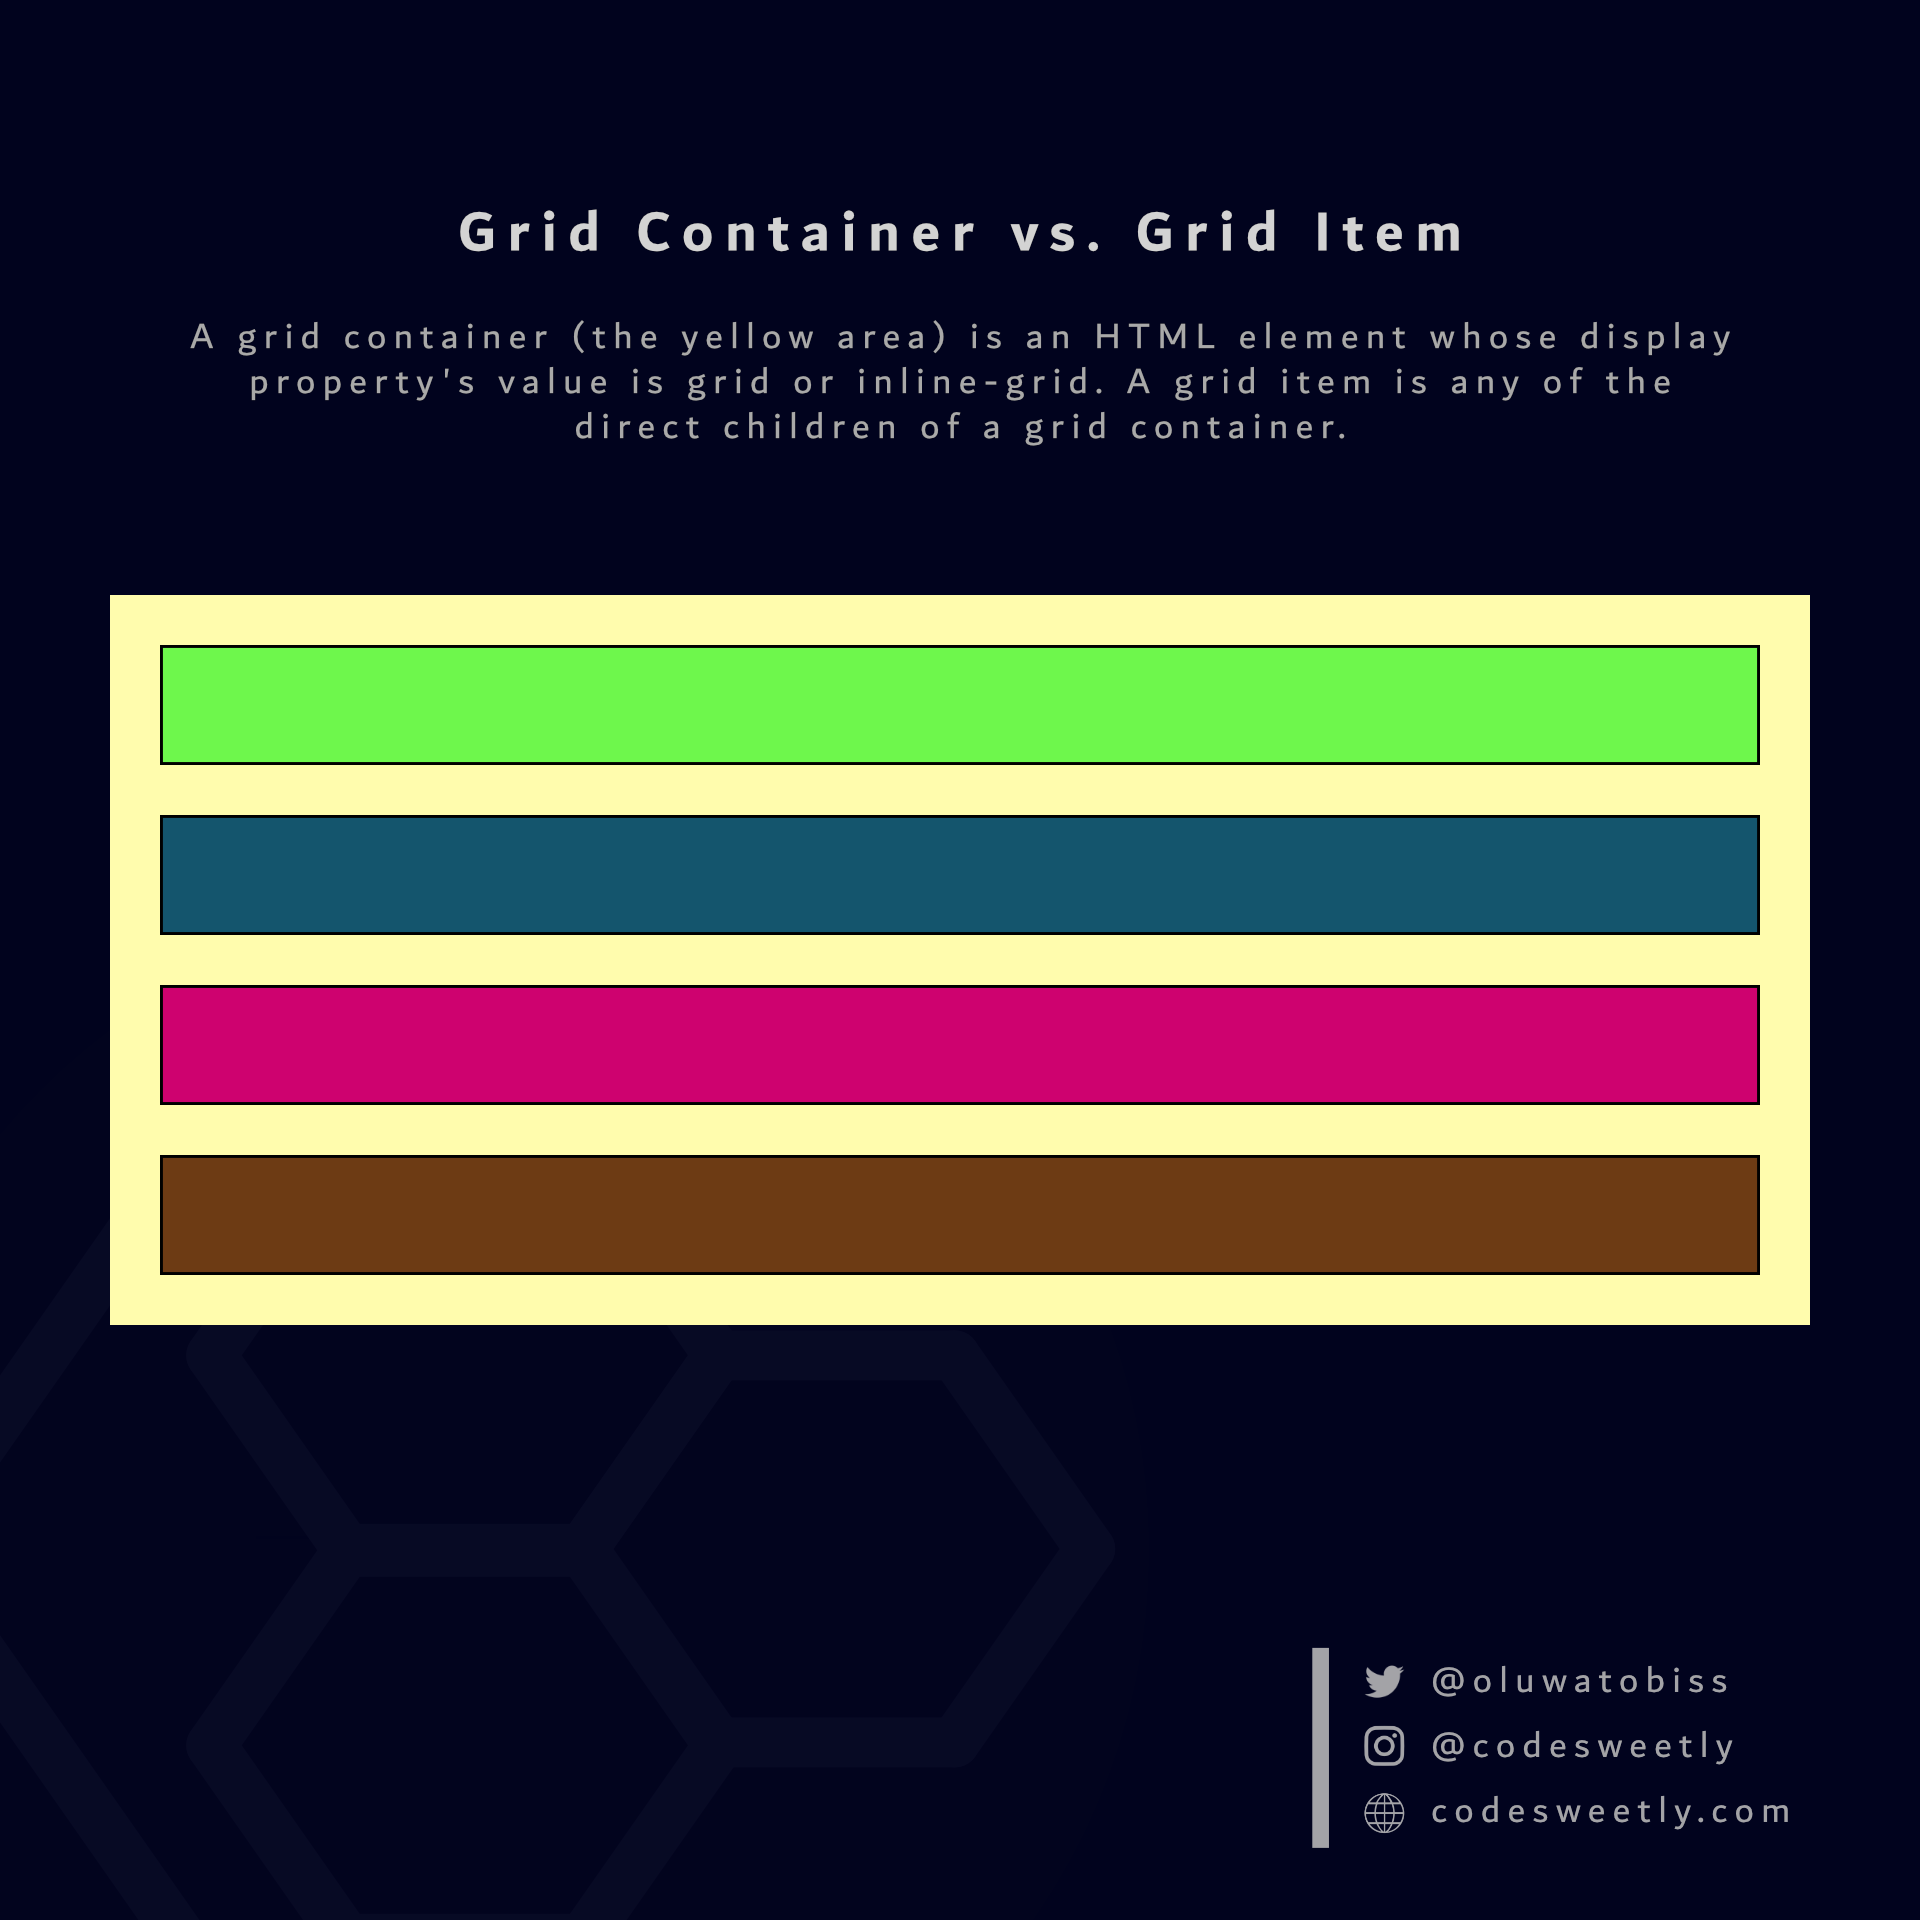 Illustration of a grid container and a grid item